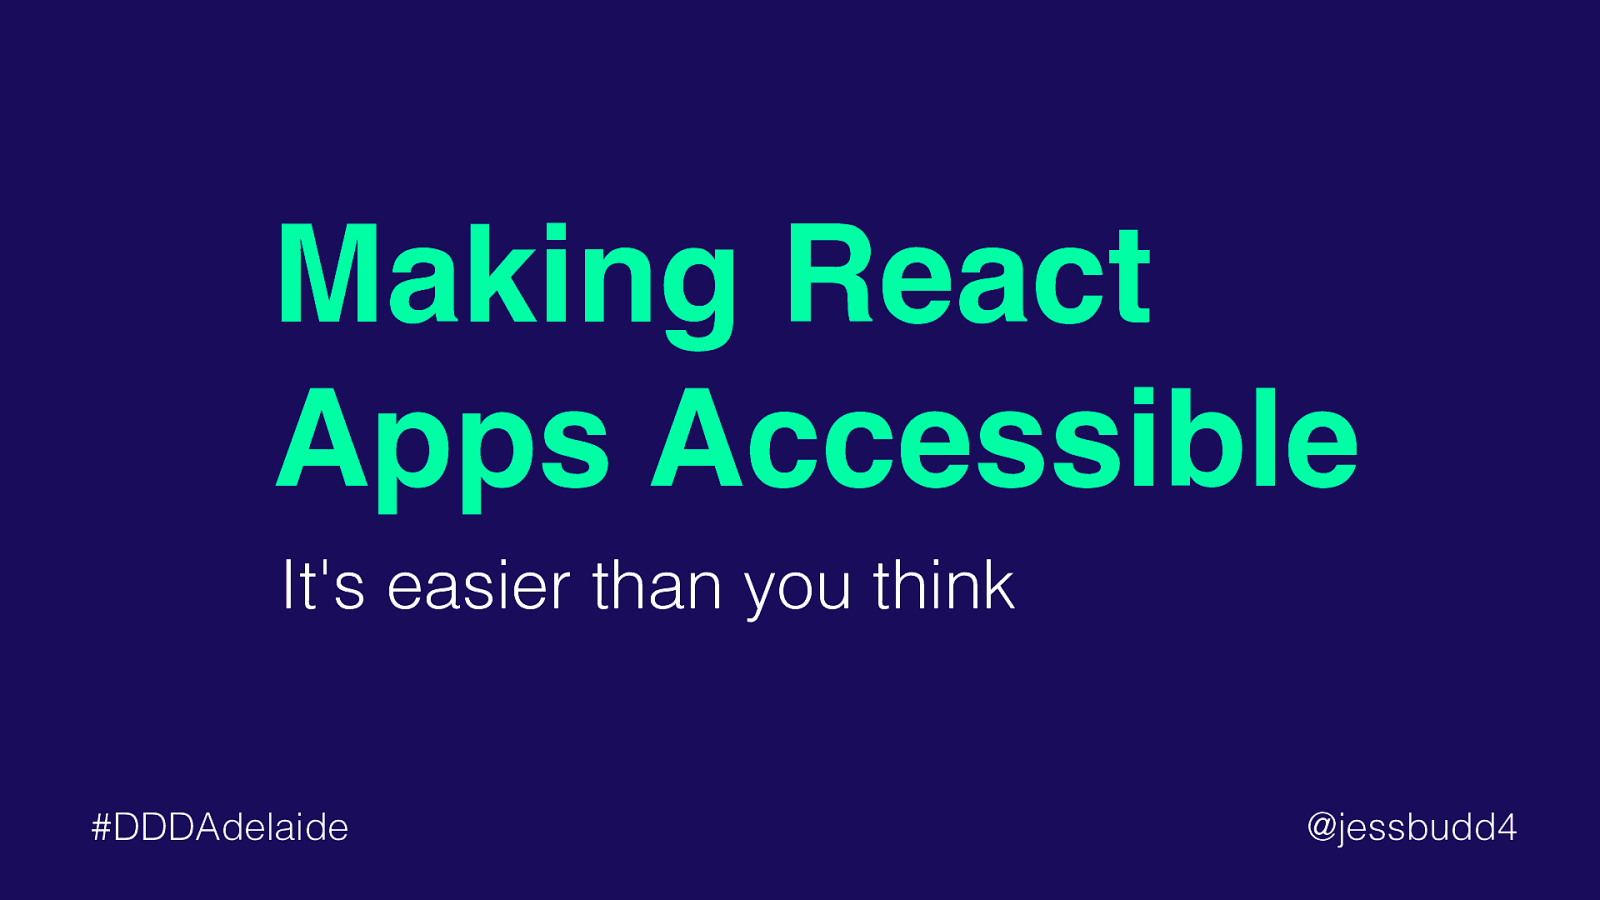 Making React Apps Accessible: It’s easier than you think